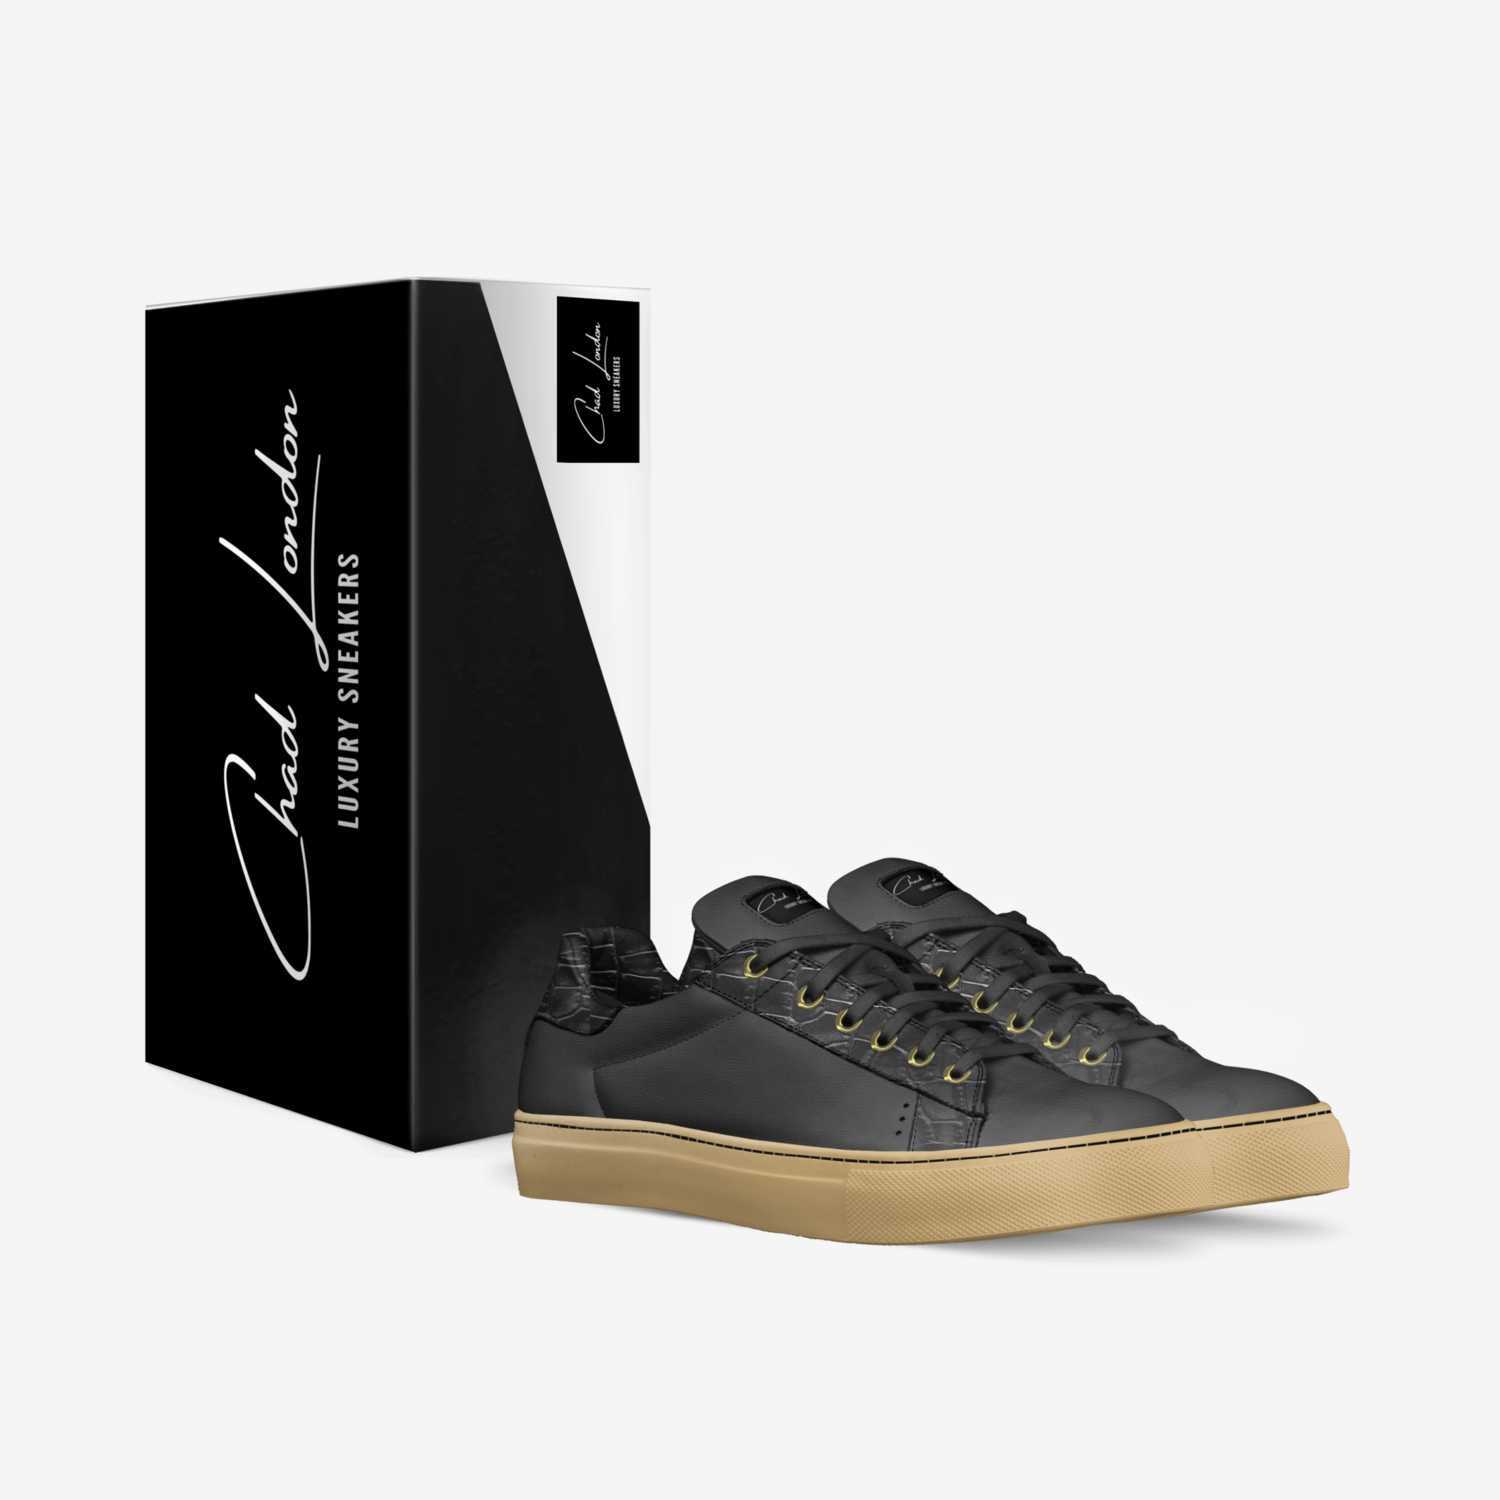 Midnight Edition custom made in Italy shoes by Chad London | Box view